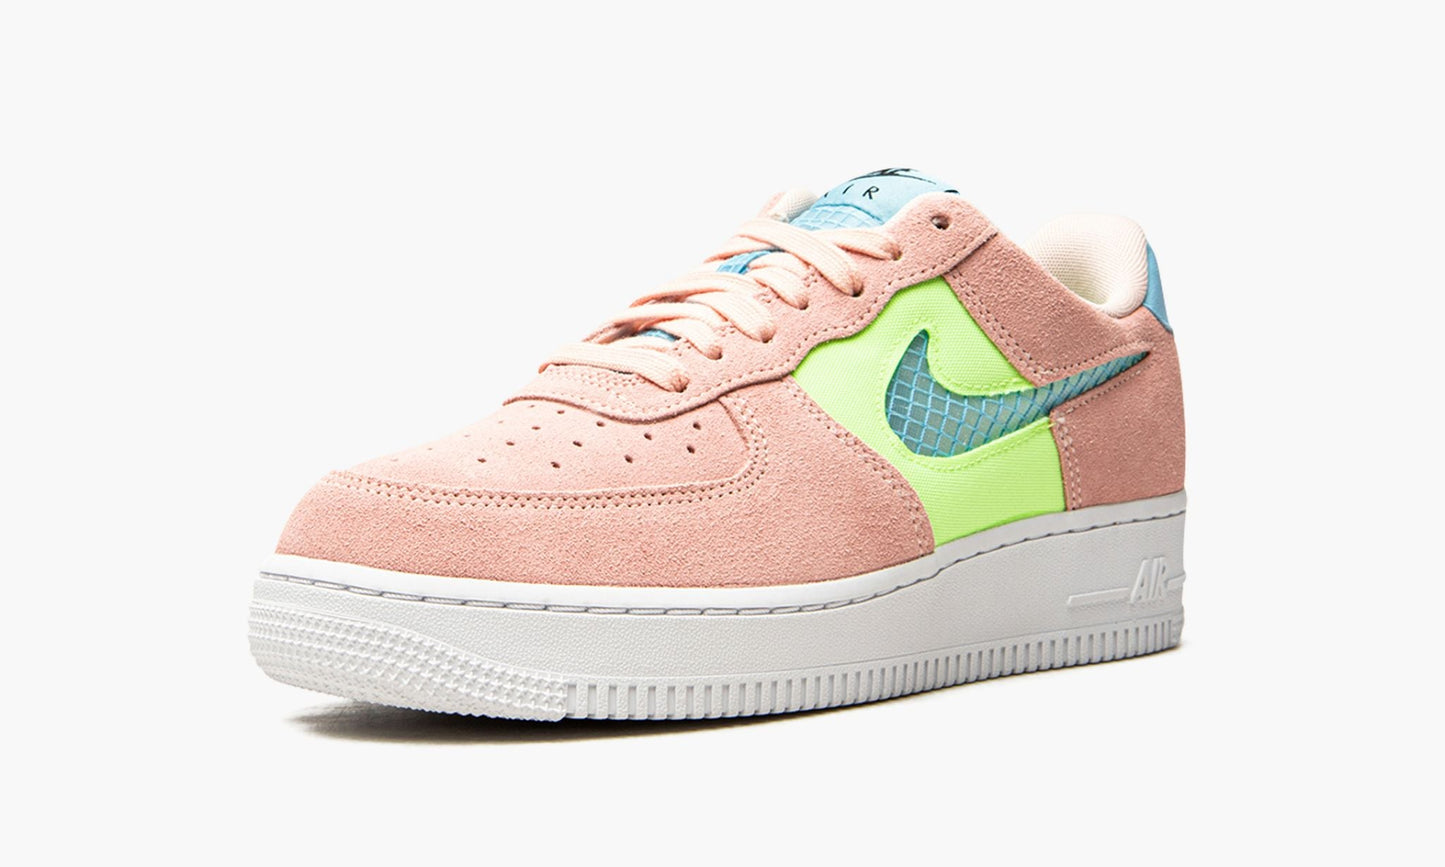 WMNS Air Force 1 Low "Washed Coral"